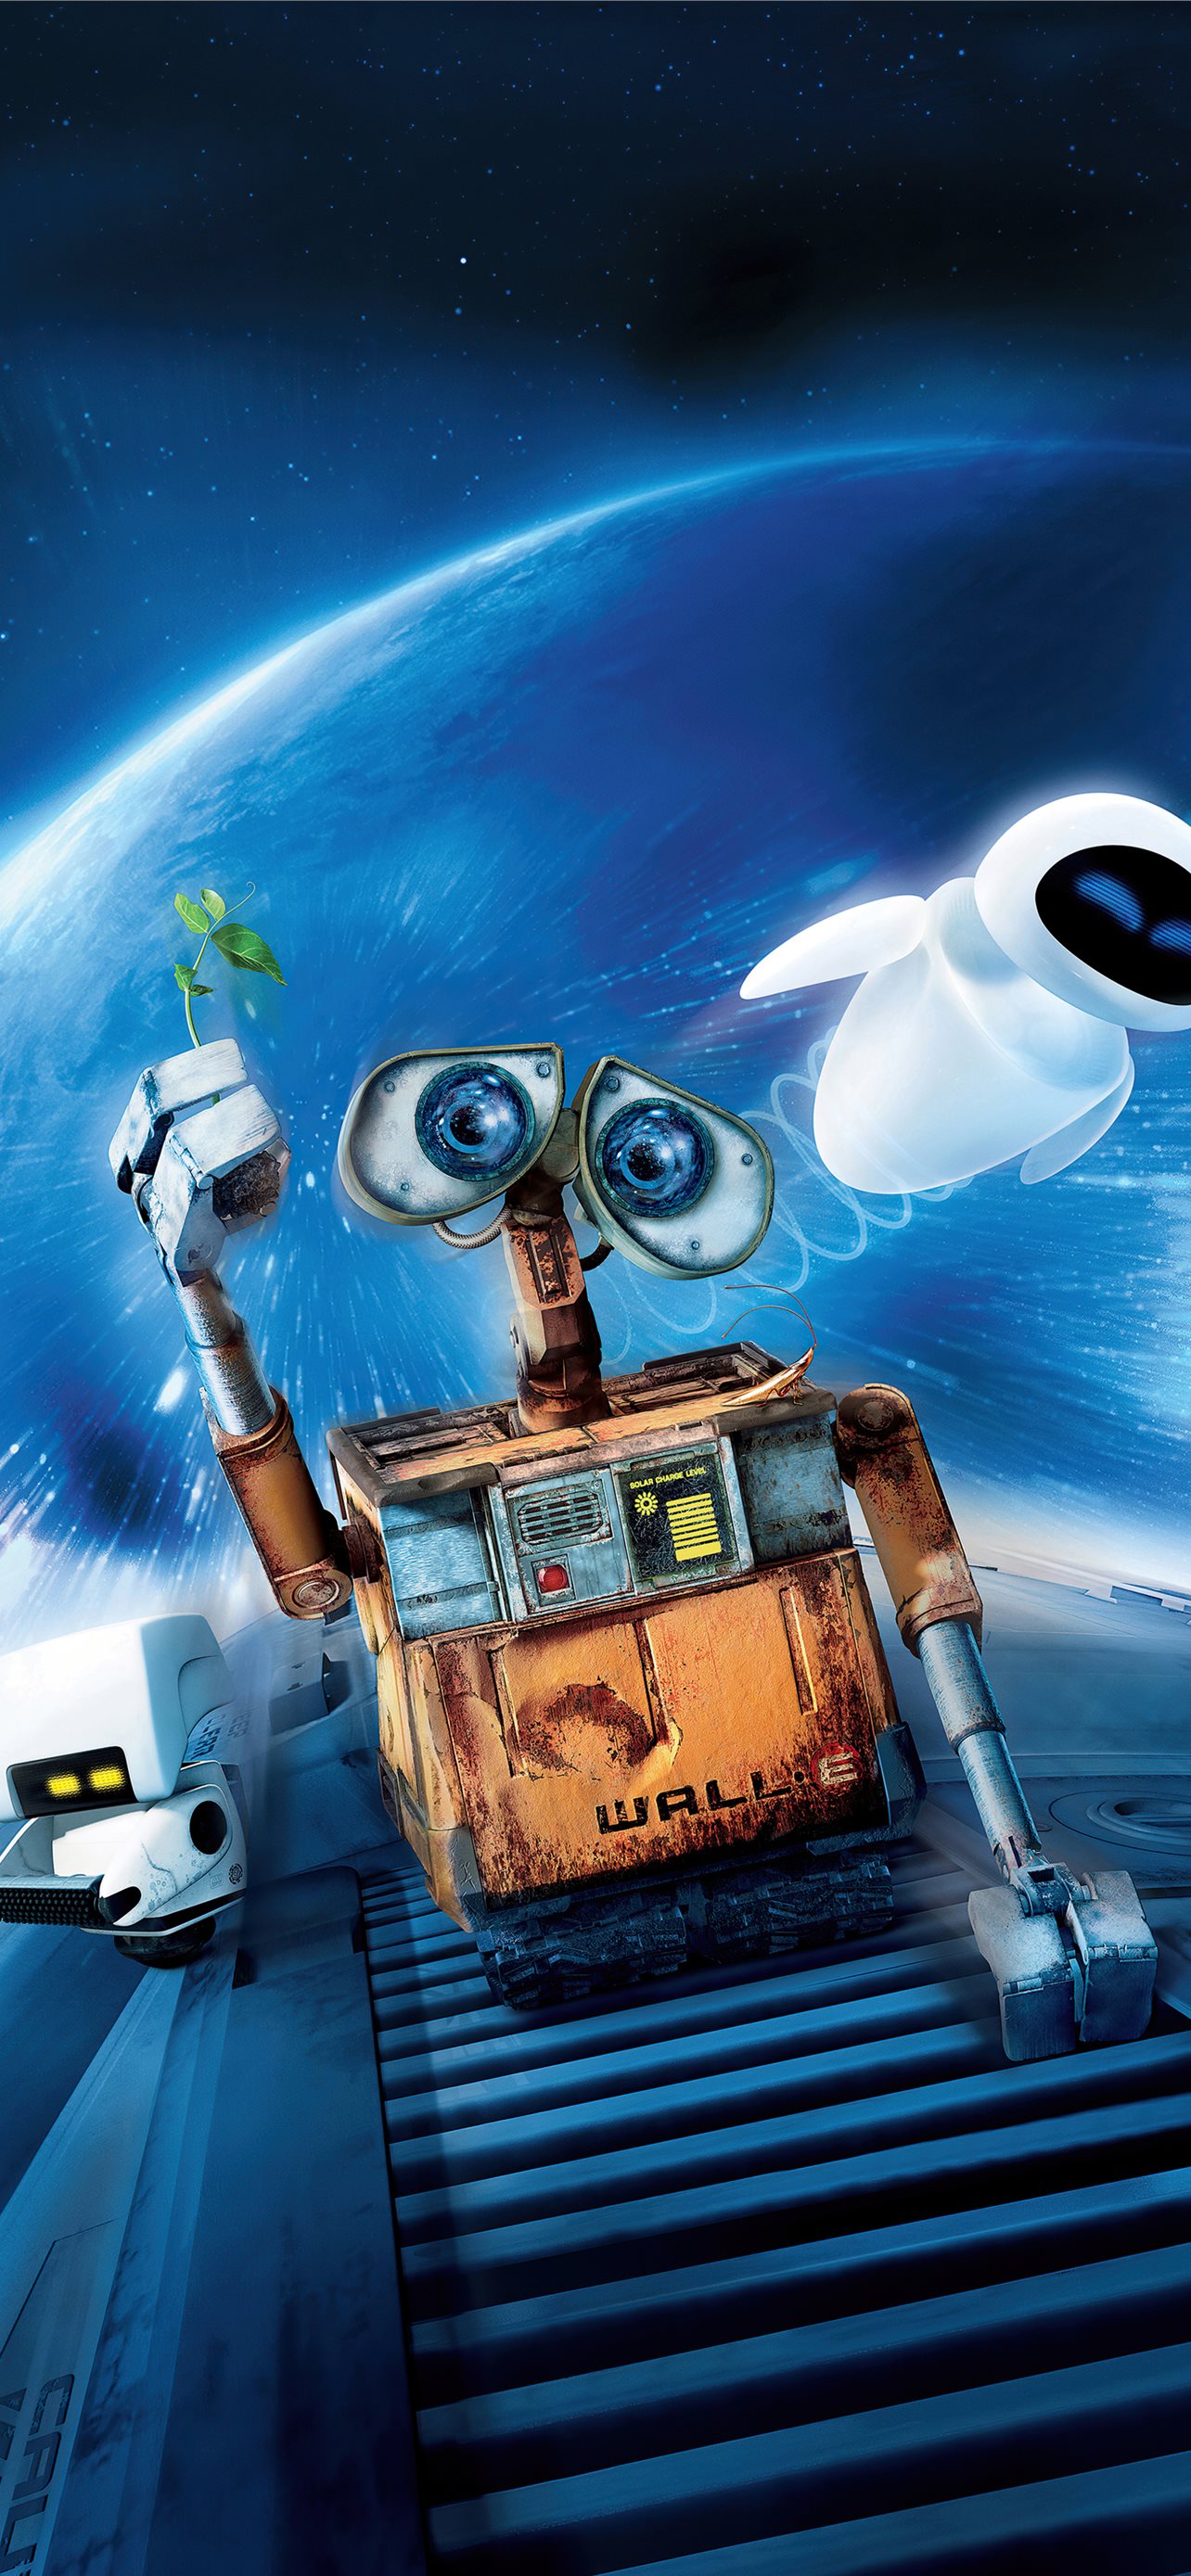 Wall E 2008 Sony Xperia X XZ Z5 Premium HD 4k Imag... iPhone Wallpapers  Free Download